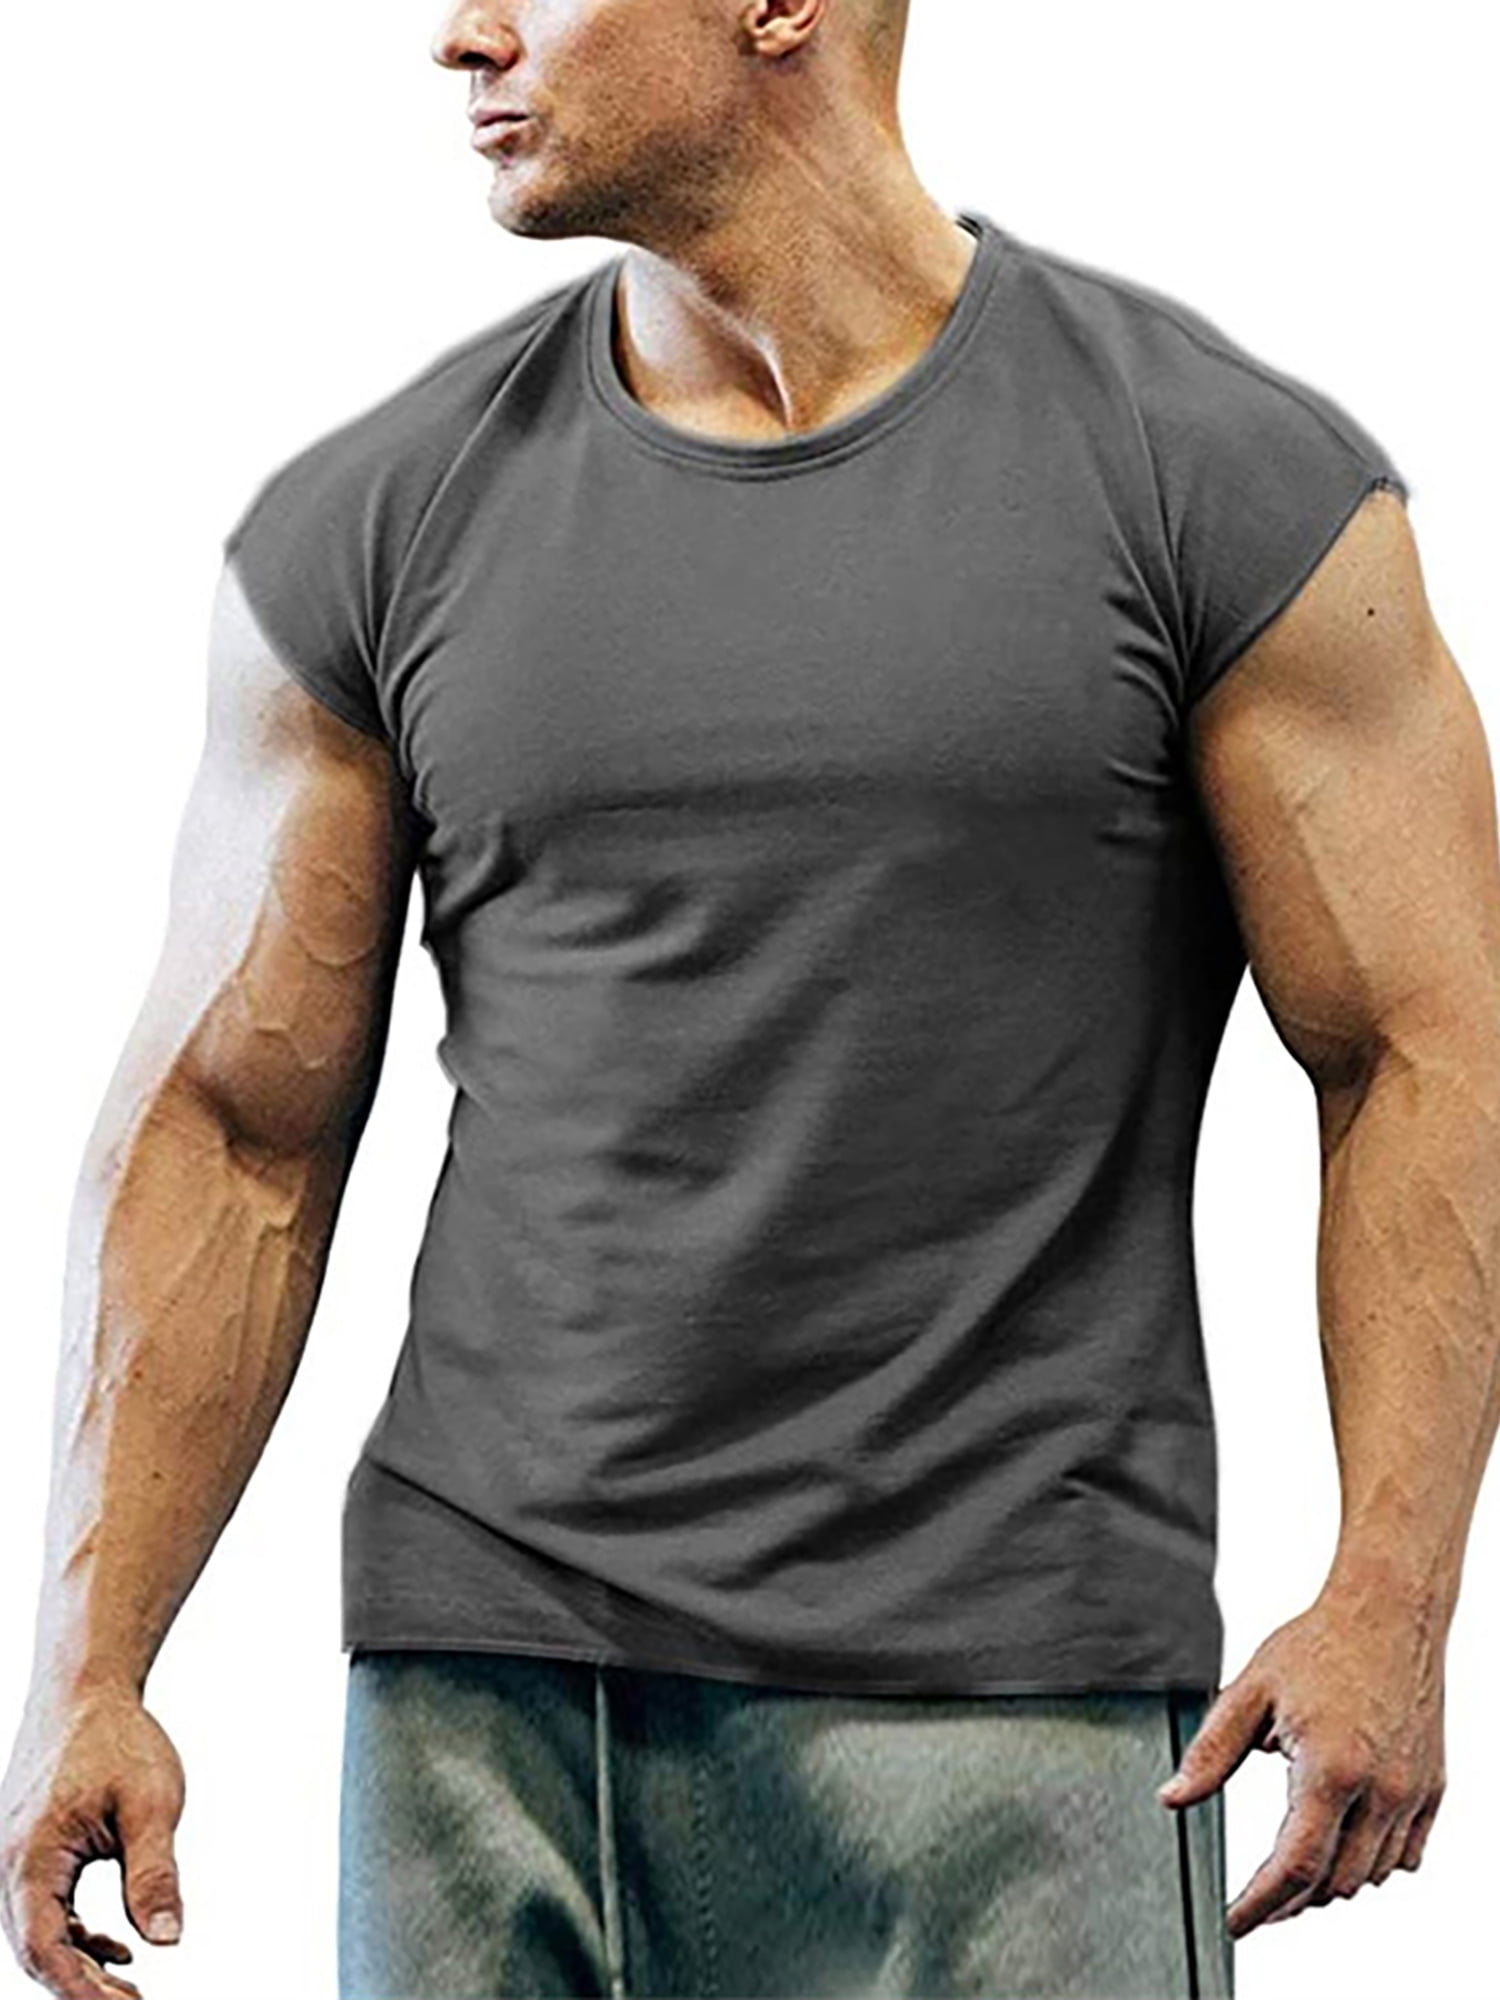 Summer Men's Slim Fit T-Shirt Solid Short Sleeve Casual T-Shirt Gym Tops Blouse 